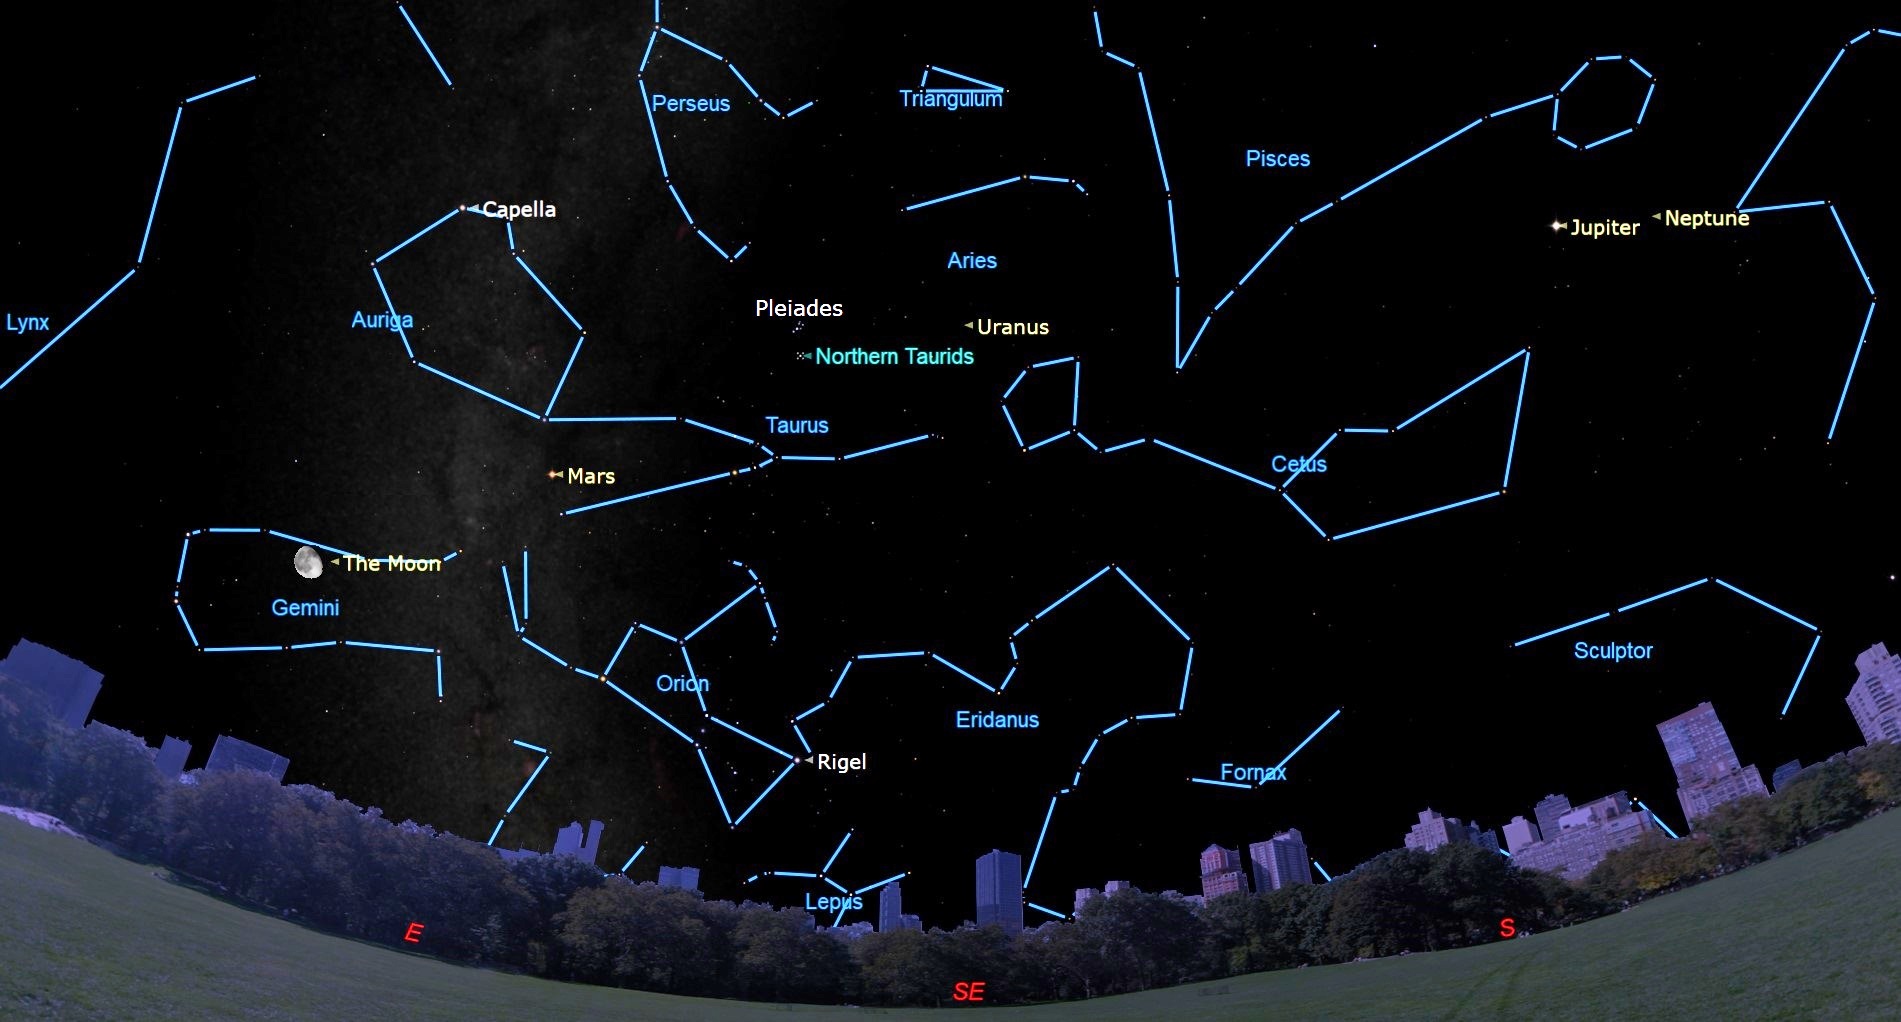 Image of the night sky on November 12, showing the constellation Taurus, from which the Northern Taurids will emerge.